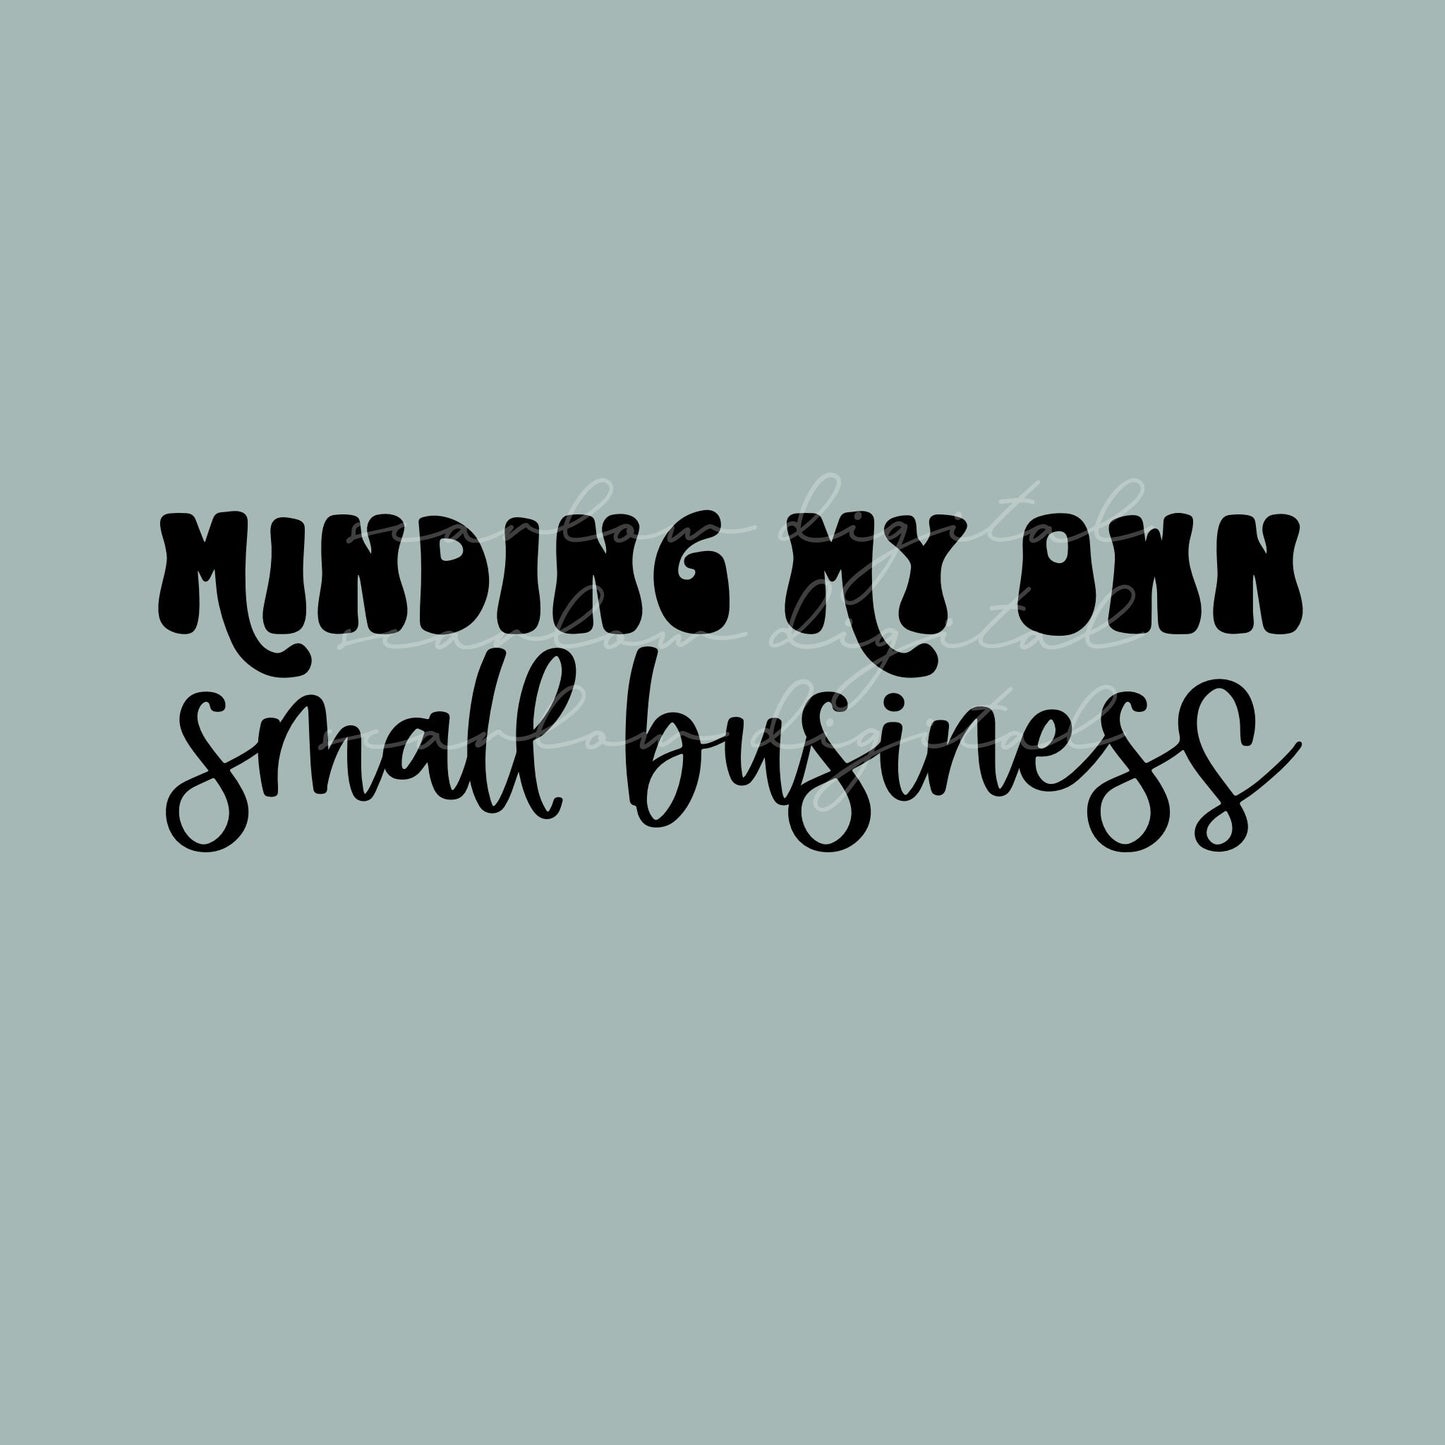 Minding My Own Small Business SVG design download for Cricut and silhouette machines, small-business owner SVG design, SVG designs for women